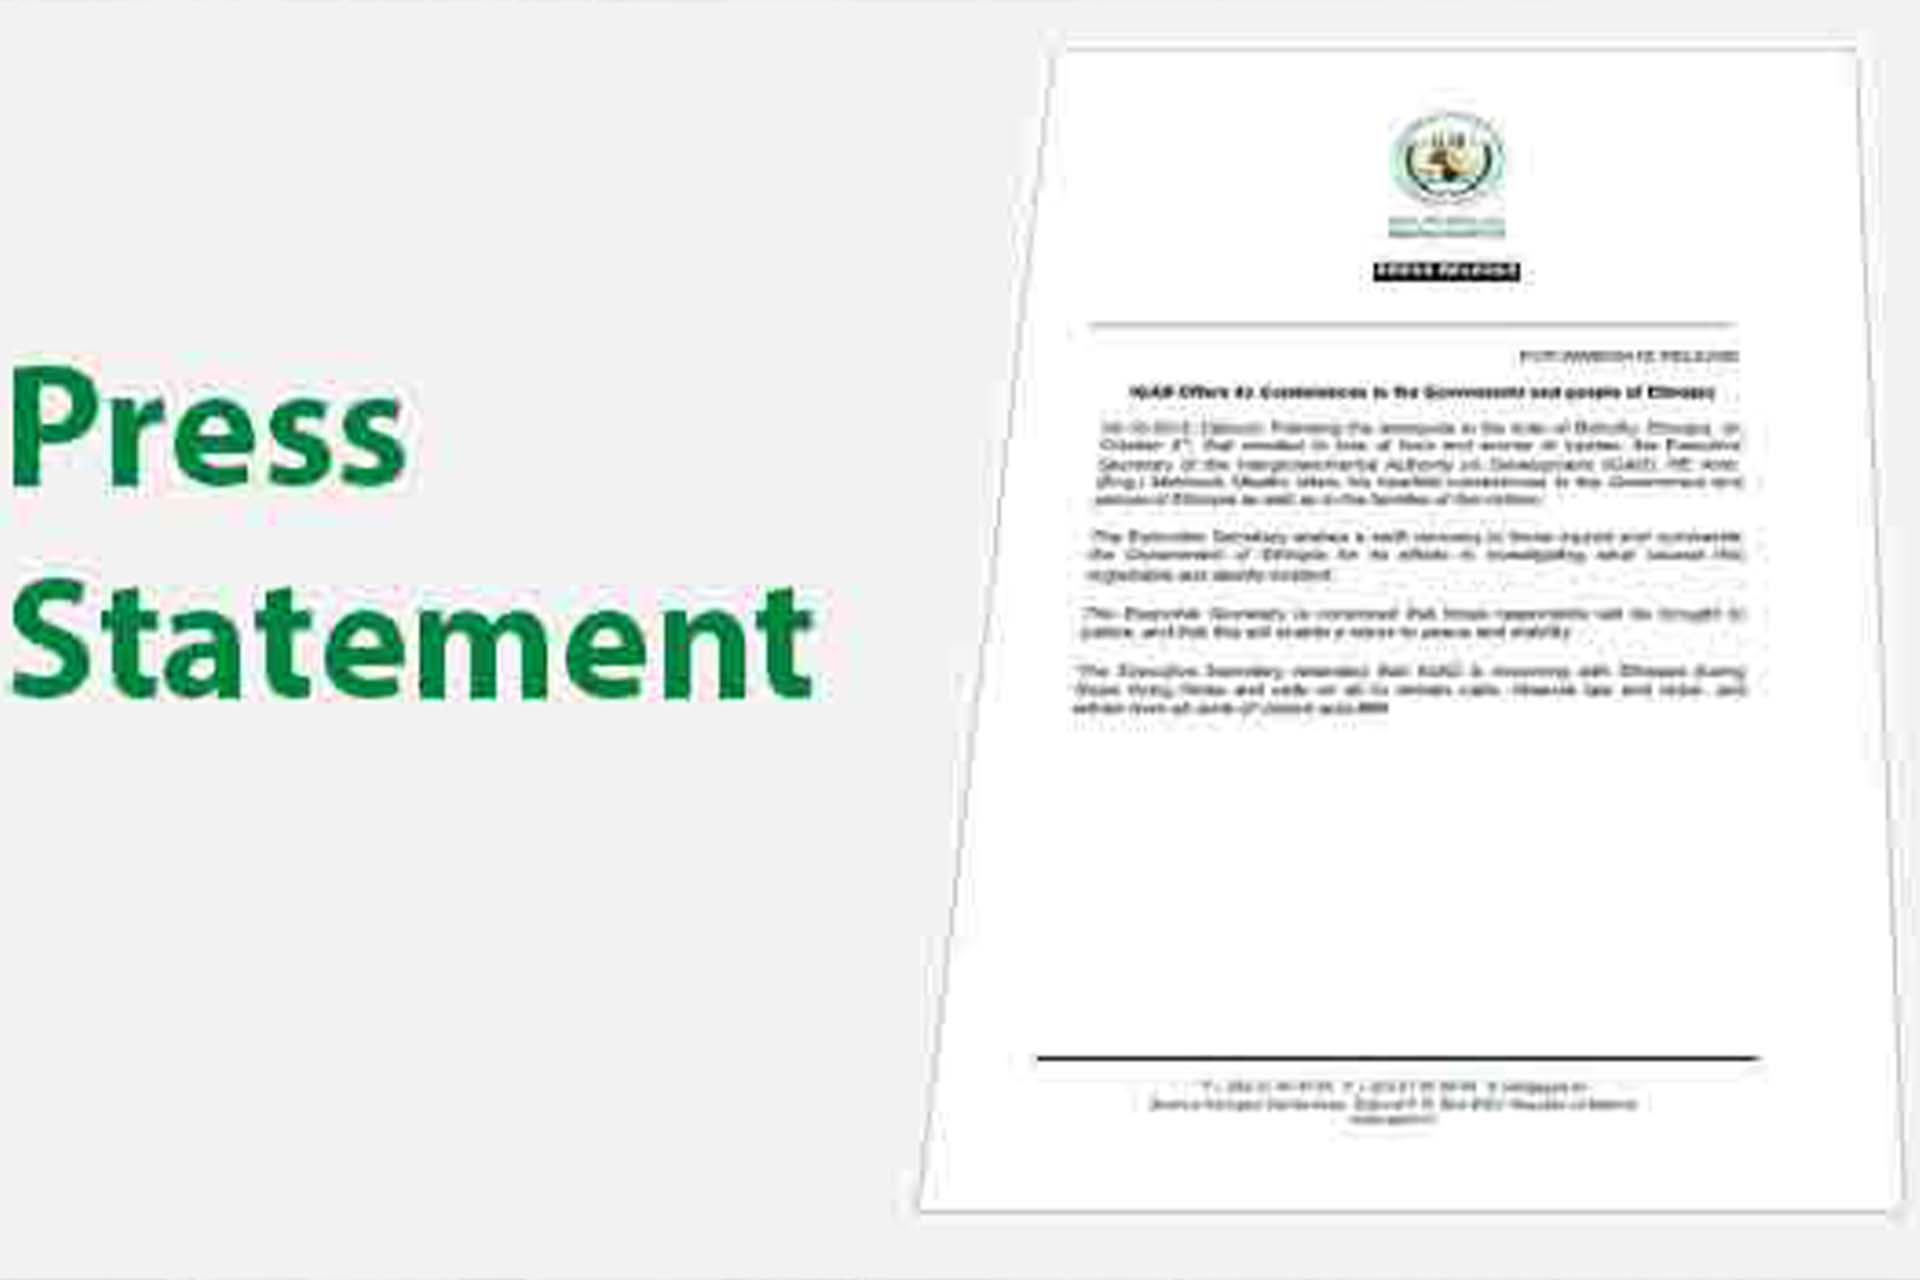 Joint Statement Of IGAD, UNMISS, RJMEC And CTSAMVM On Current Challenges In The Implementation Of The R-ARCSS